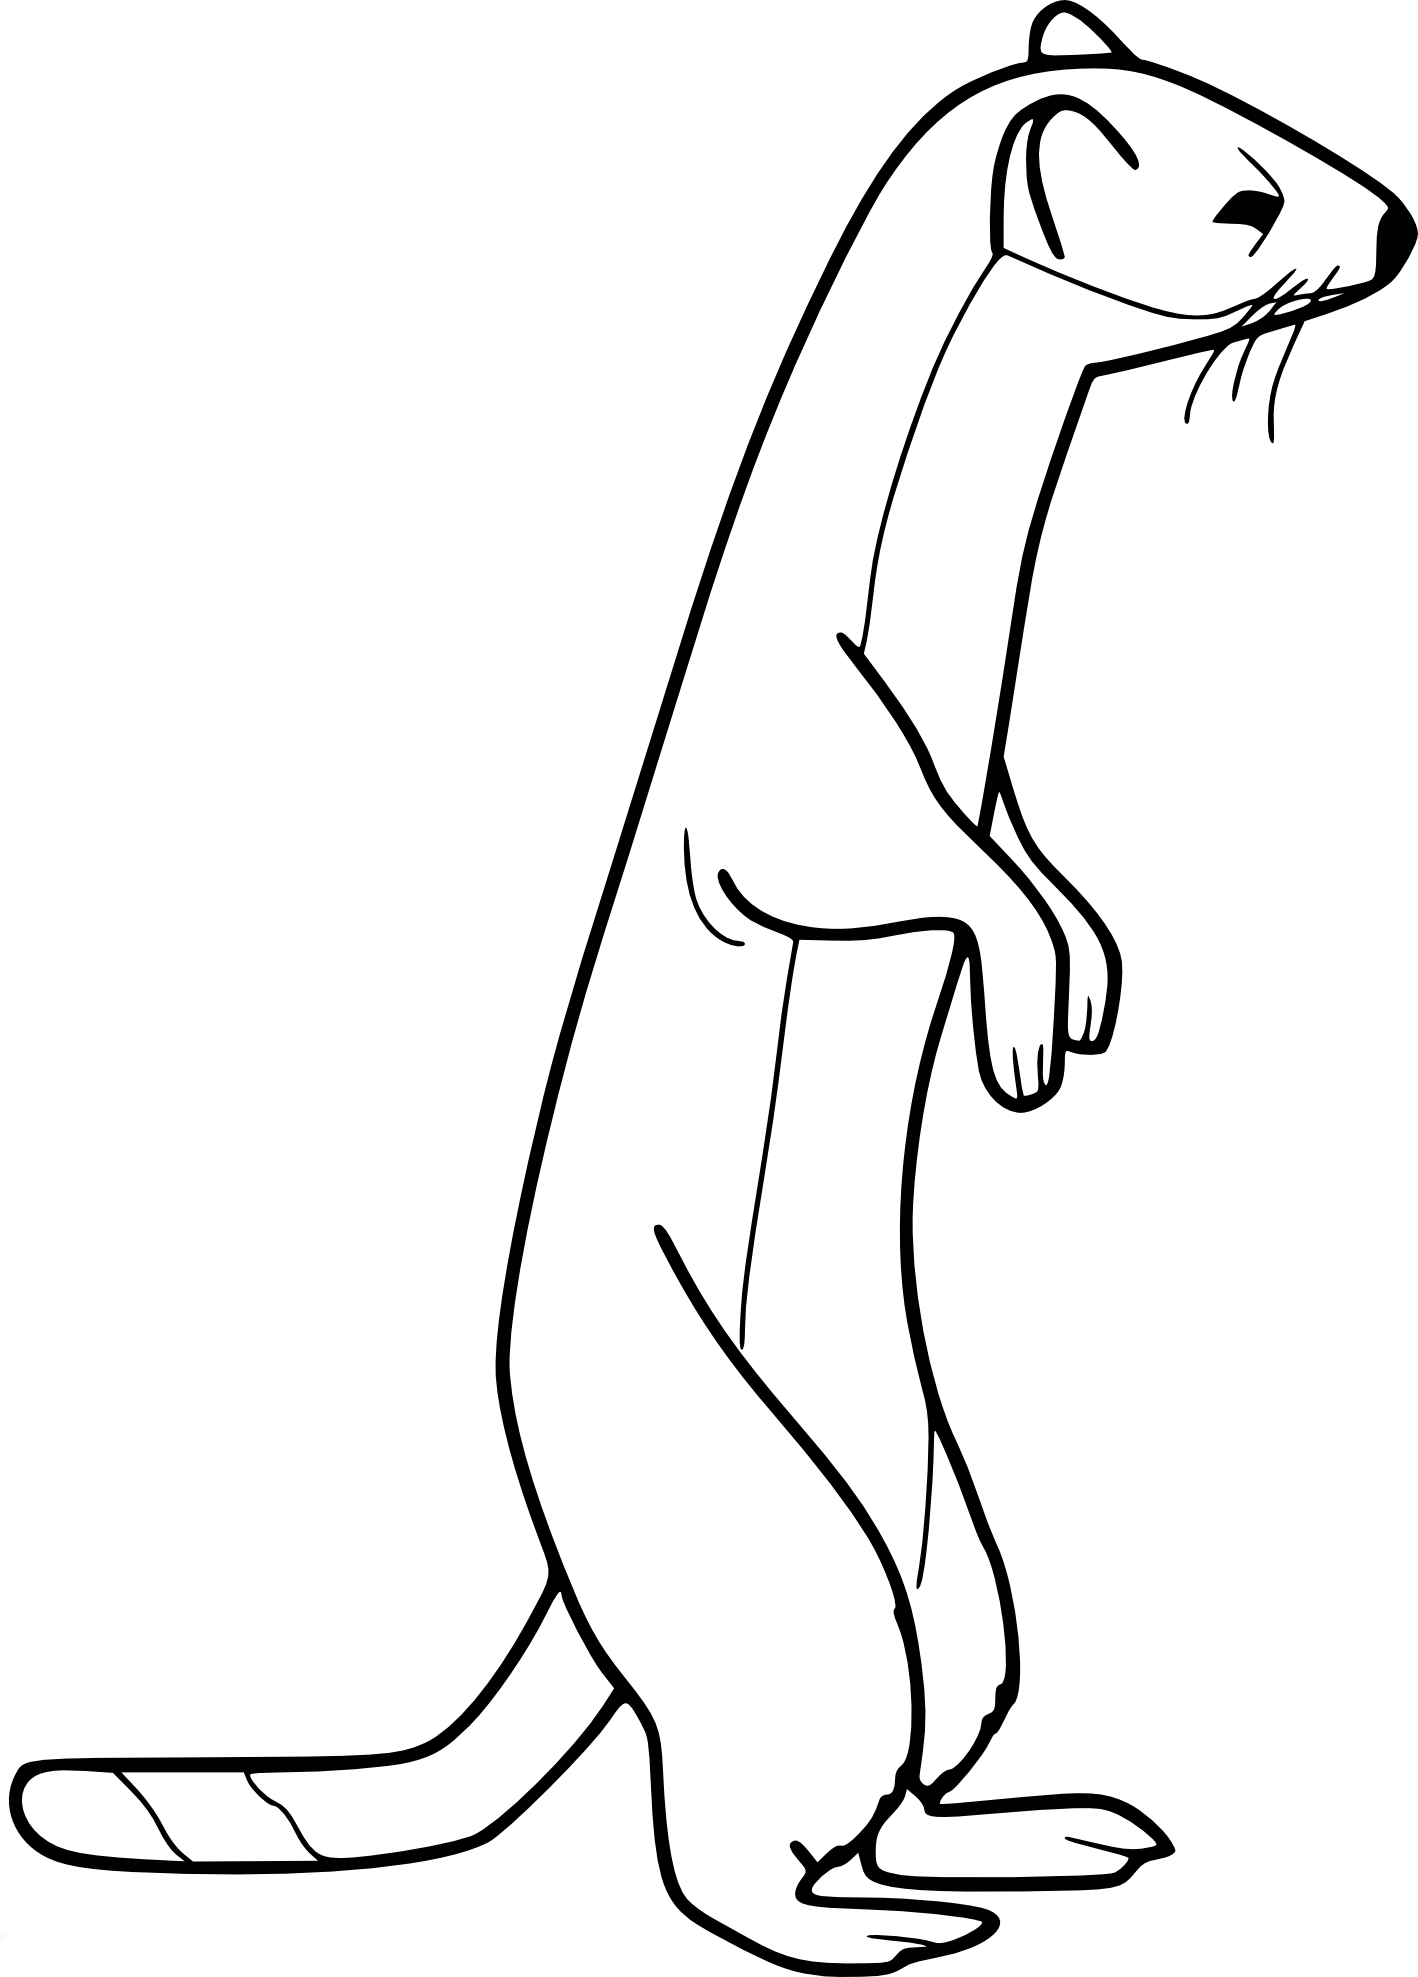 Weasel drawing and coloring page